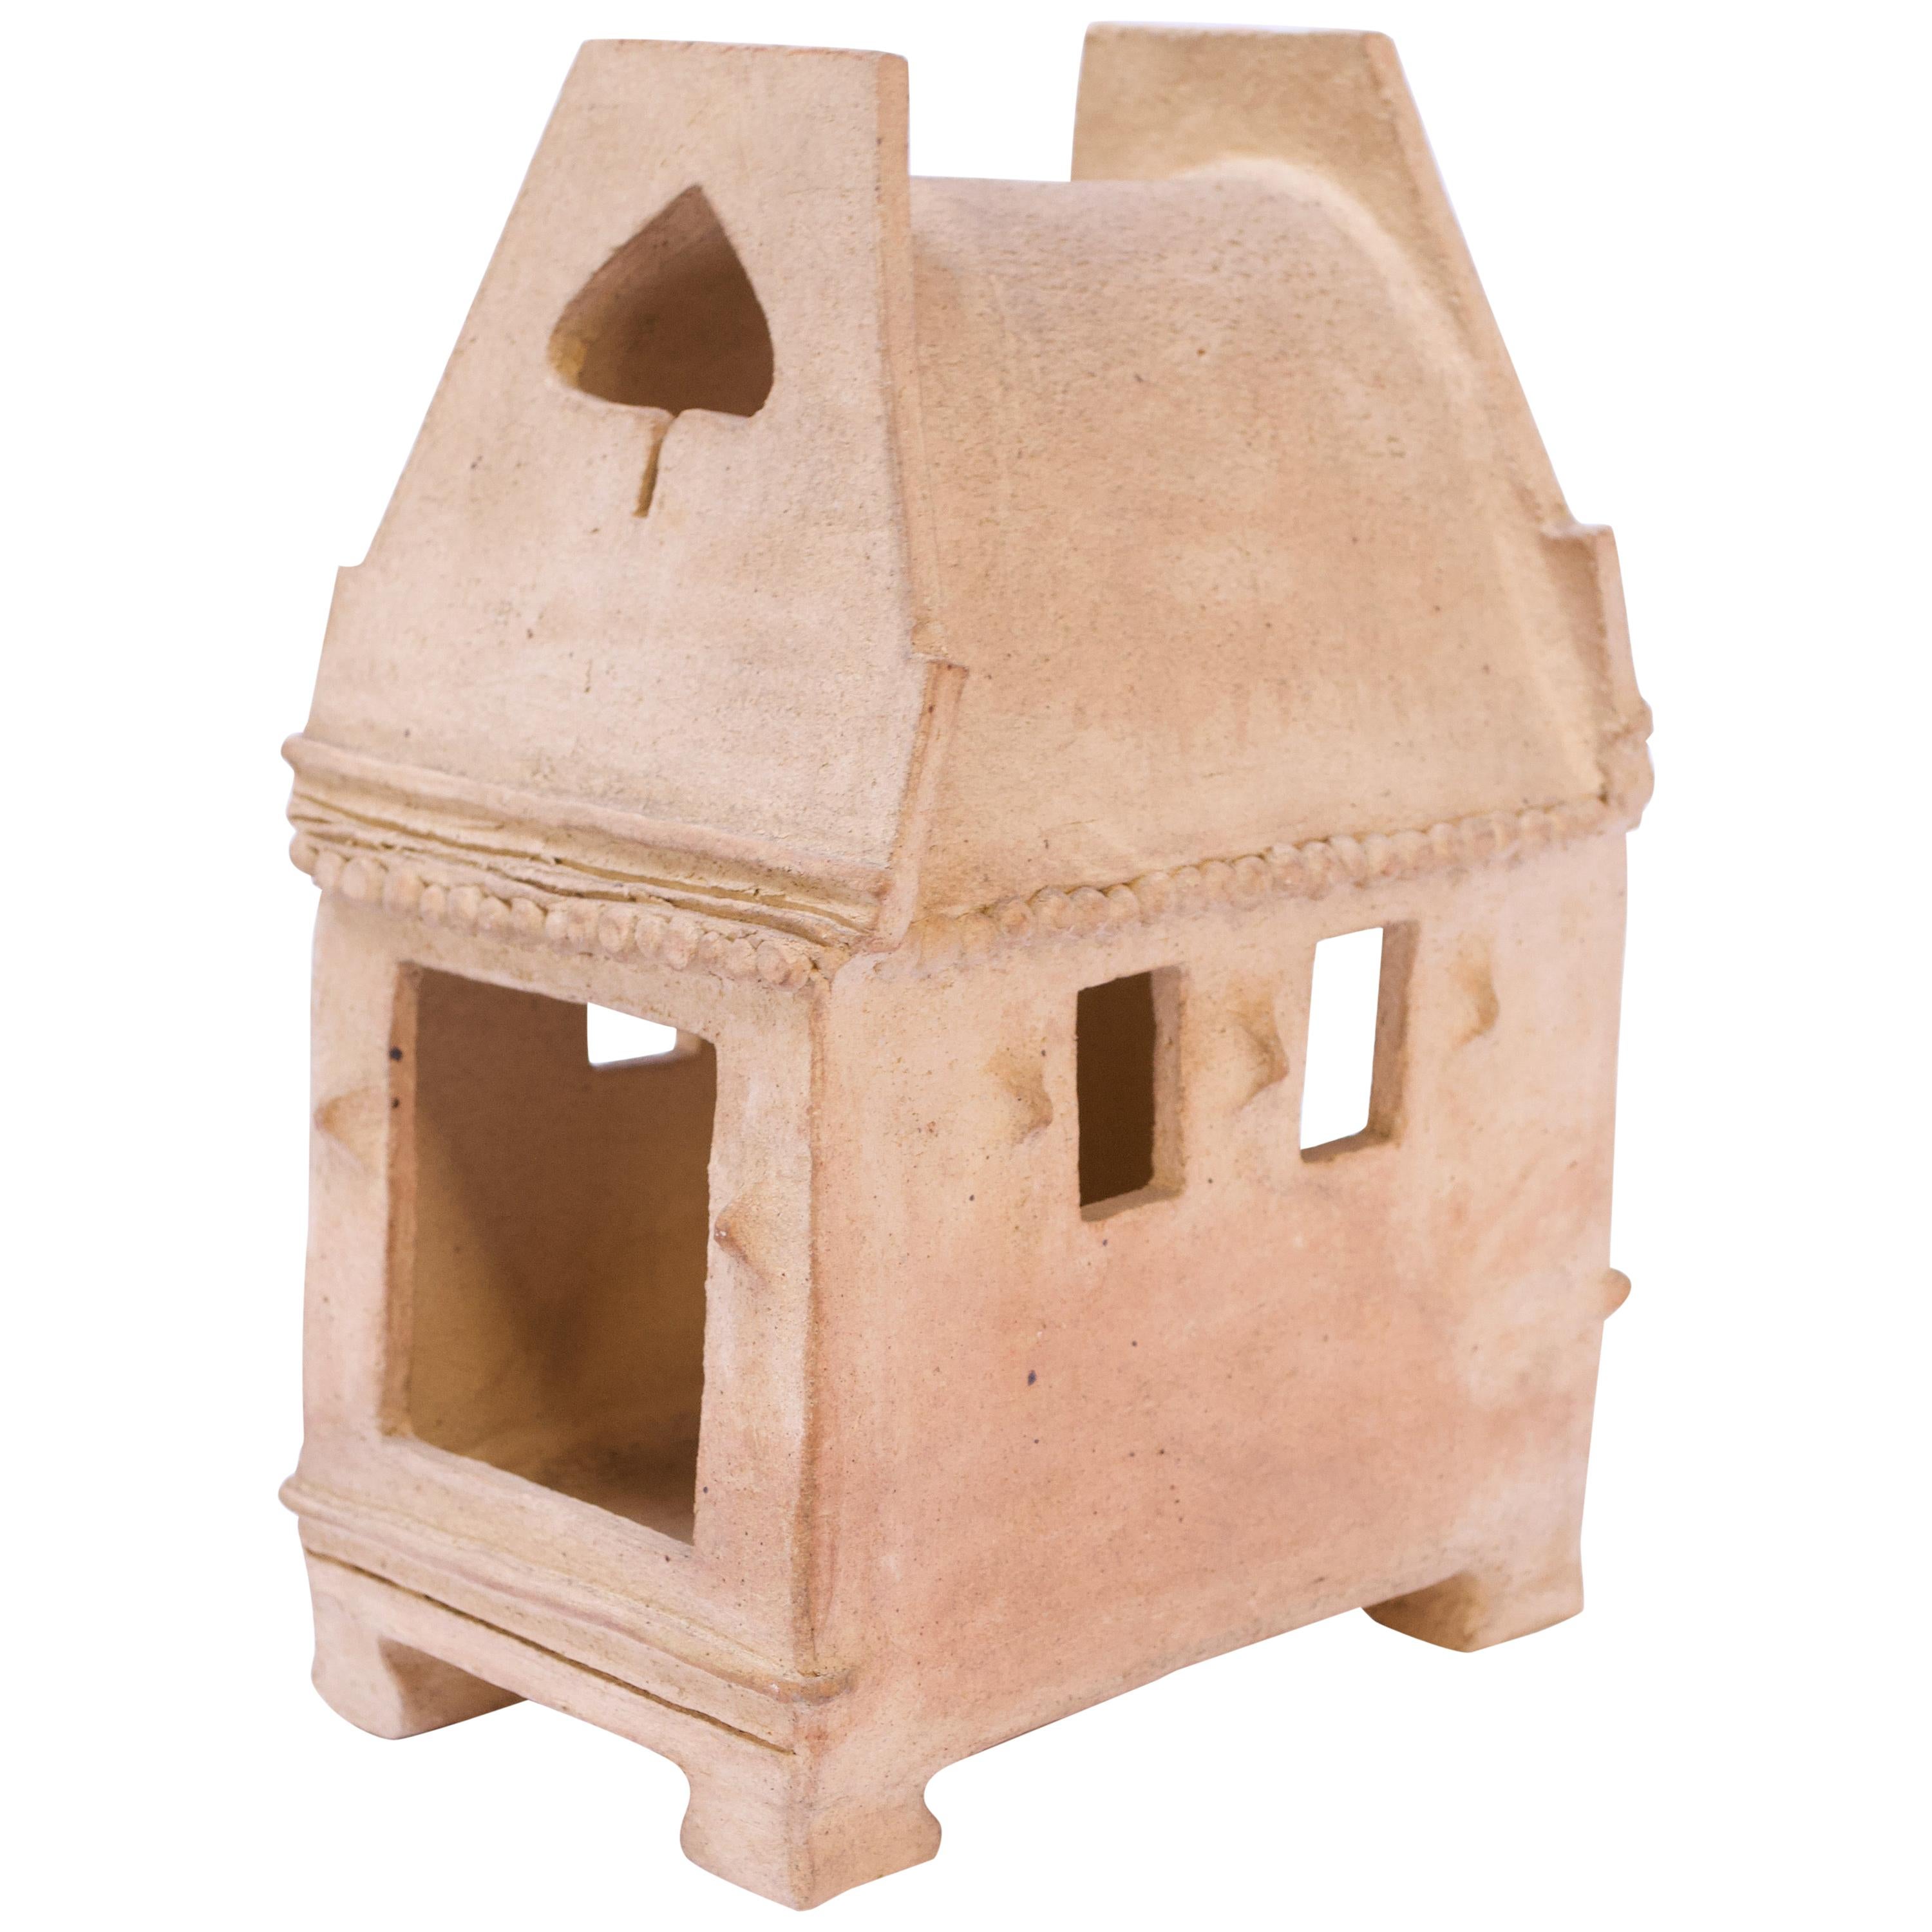 1973 Unglazed Stoneware "House" Sculpture by Pollack